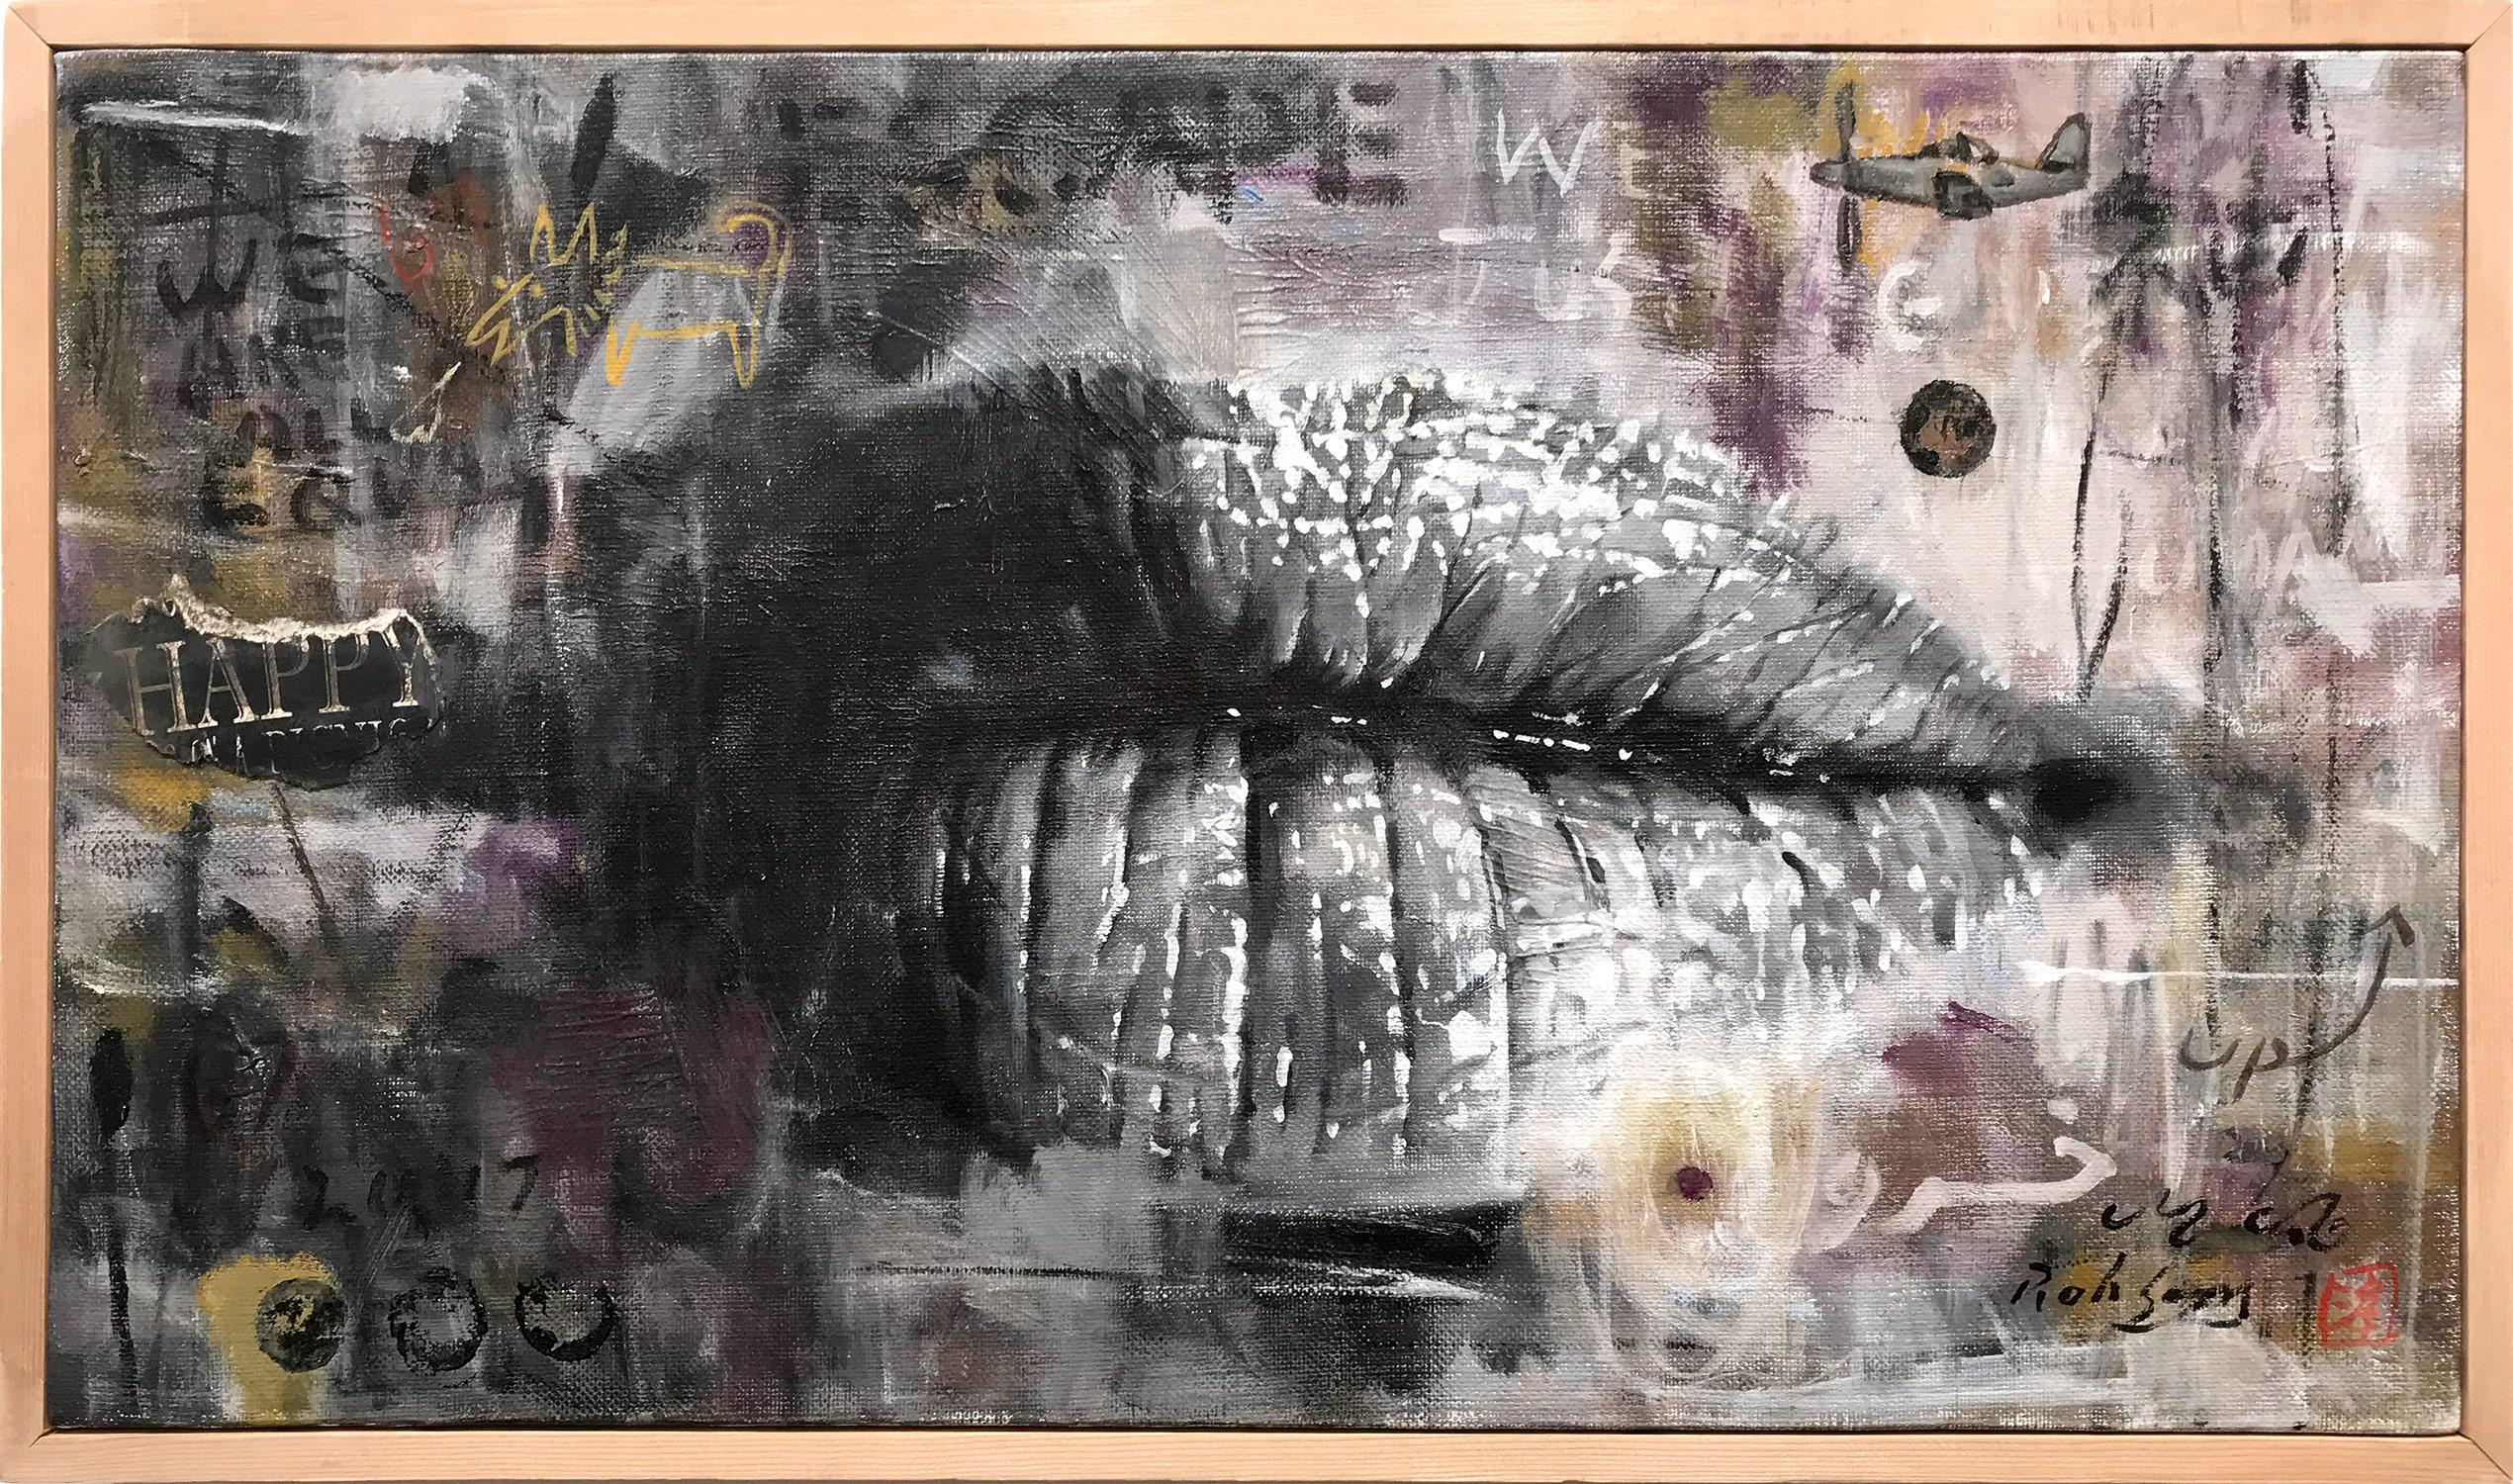 "Sound 0096" Contemporary Urban Abstract Oil Painting of Photorealistic Lips